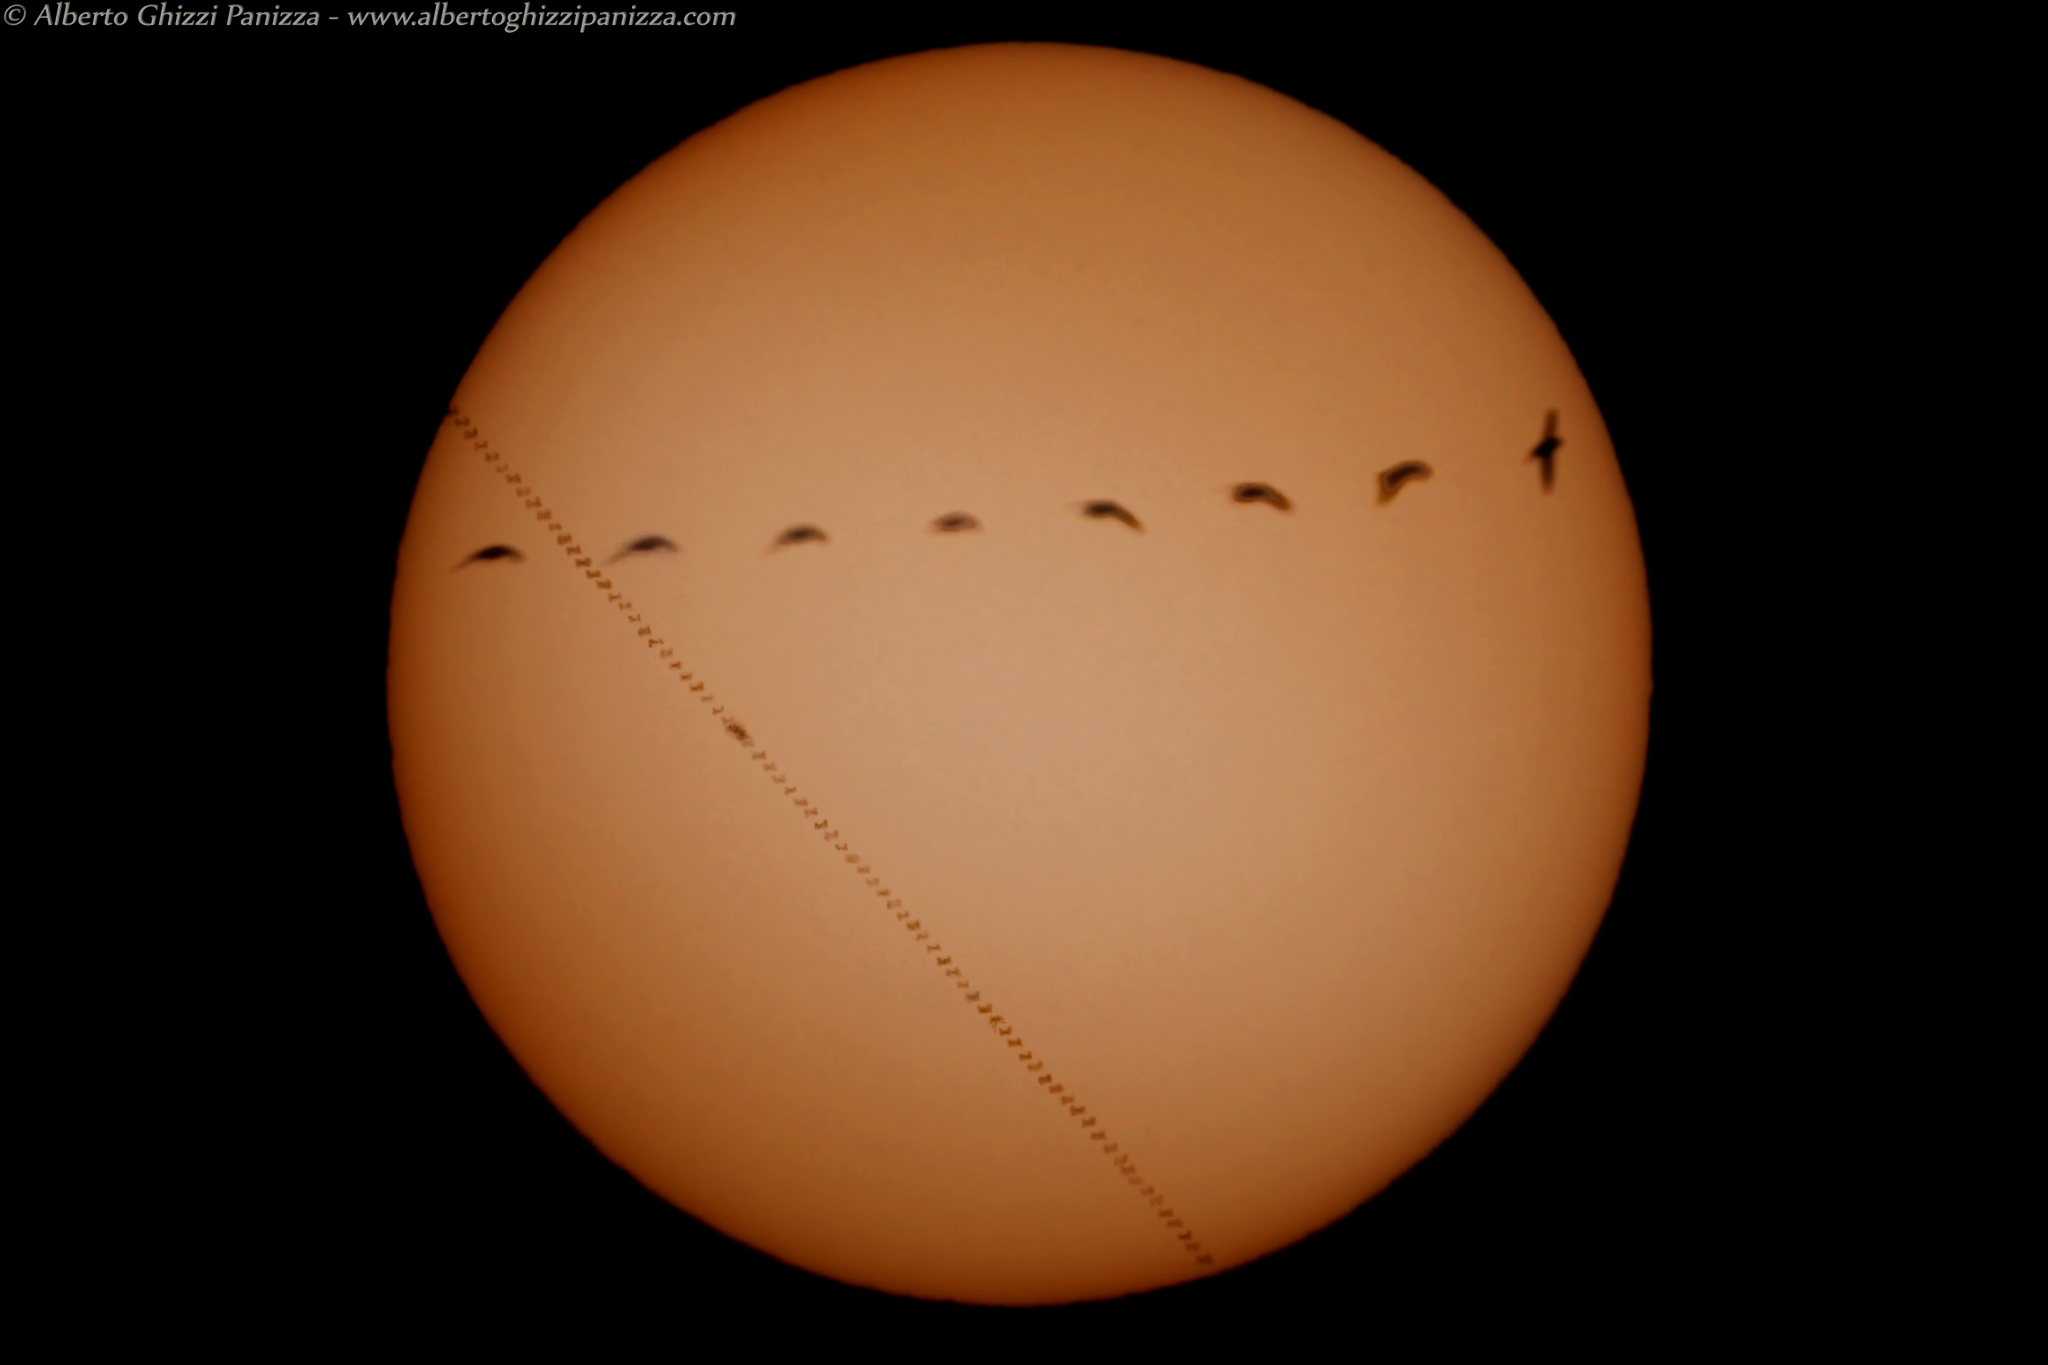 Transit of the ISS on Parma of 08-06-2020 with volatile...